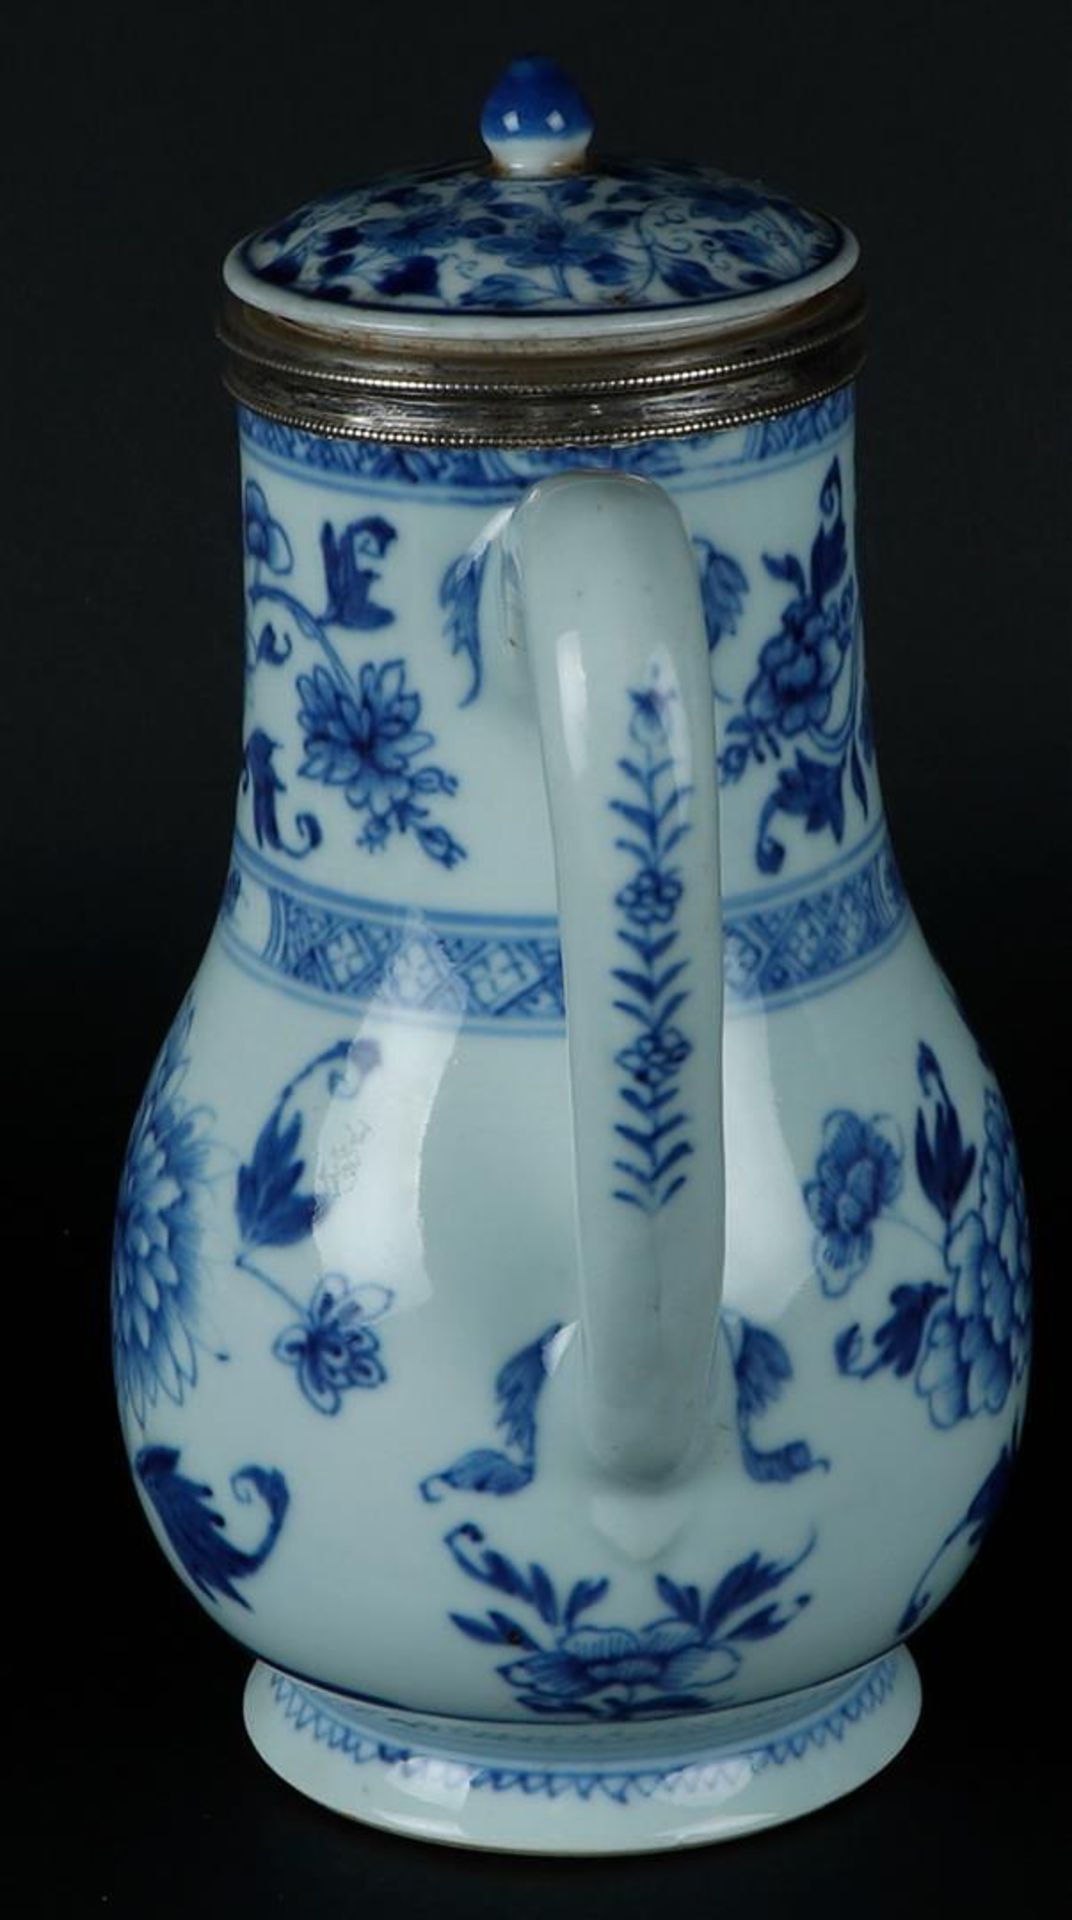 A large porcelain jug with peony decoration, around which rich floral decoration. With silver neck r - Image 4 of 6